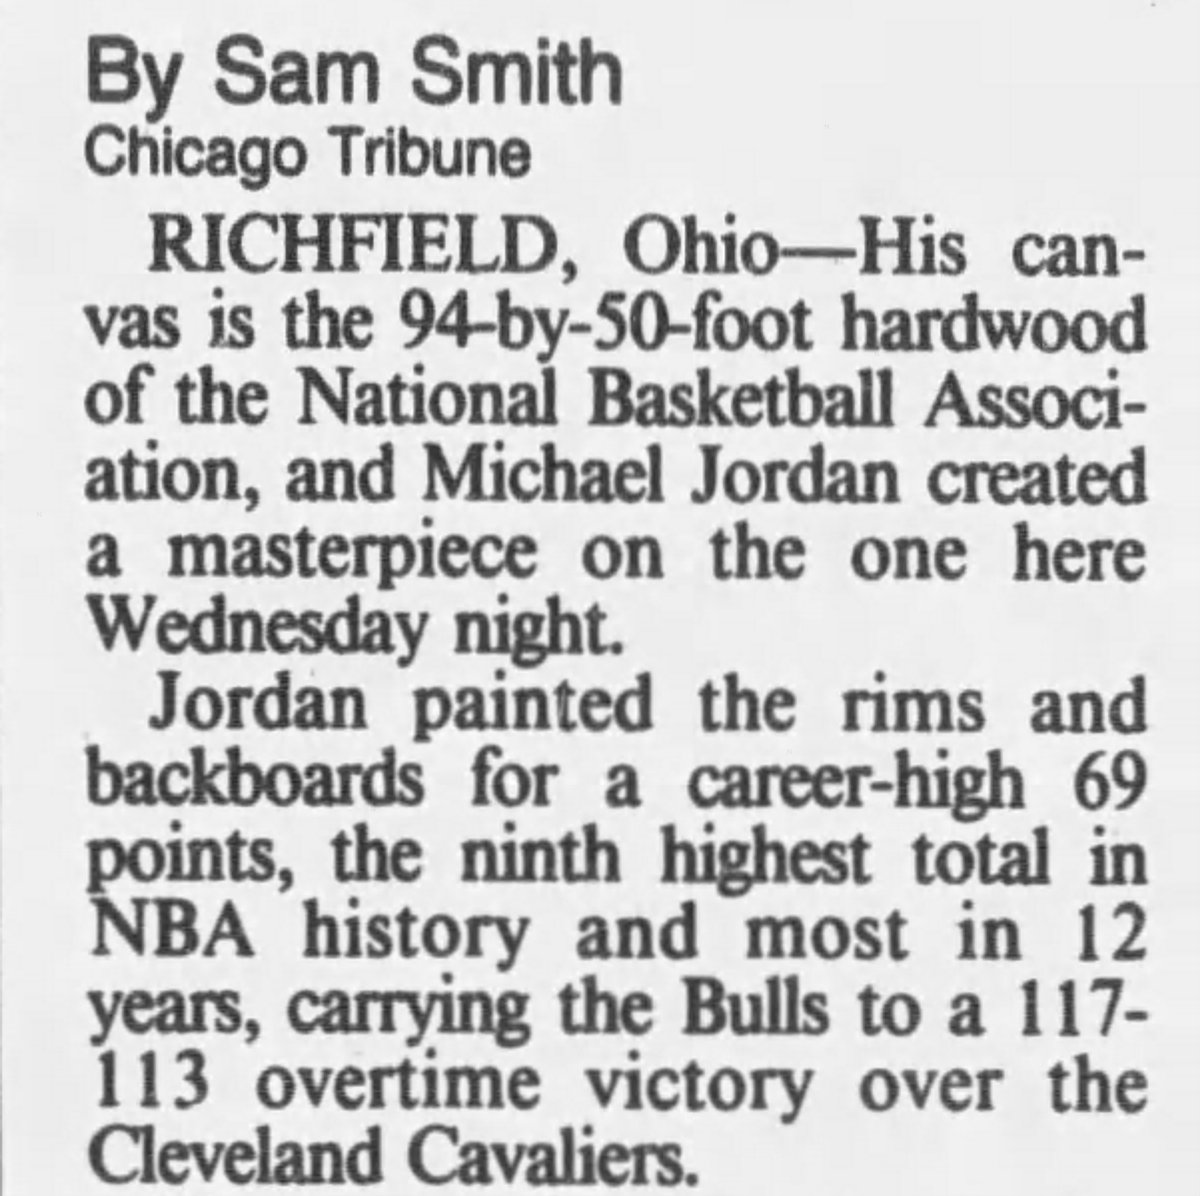 I feel really fortunate to have had Sam Smith at the Trib growing up, and getting to read him everyday.